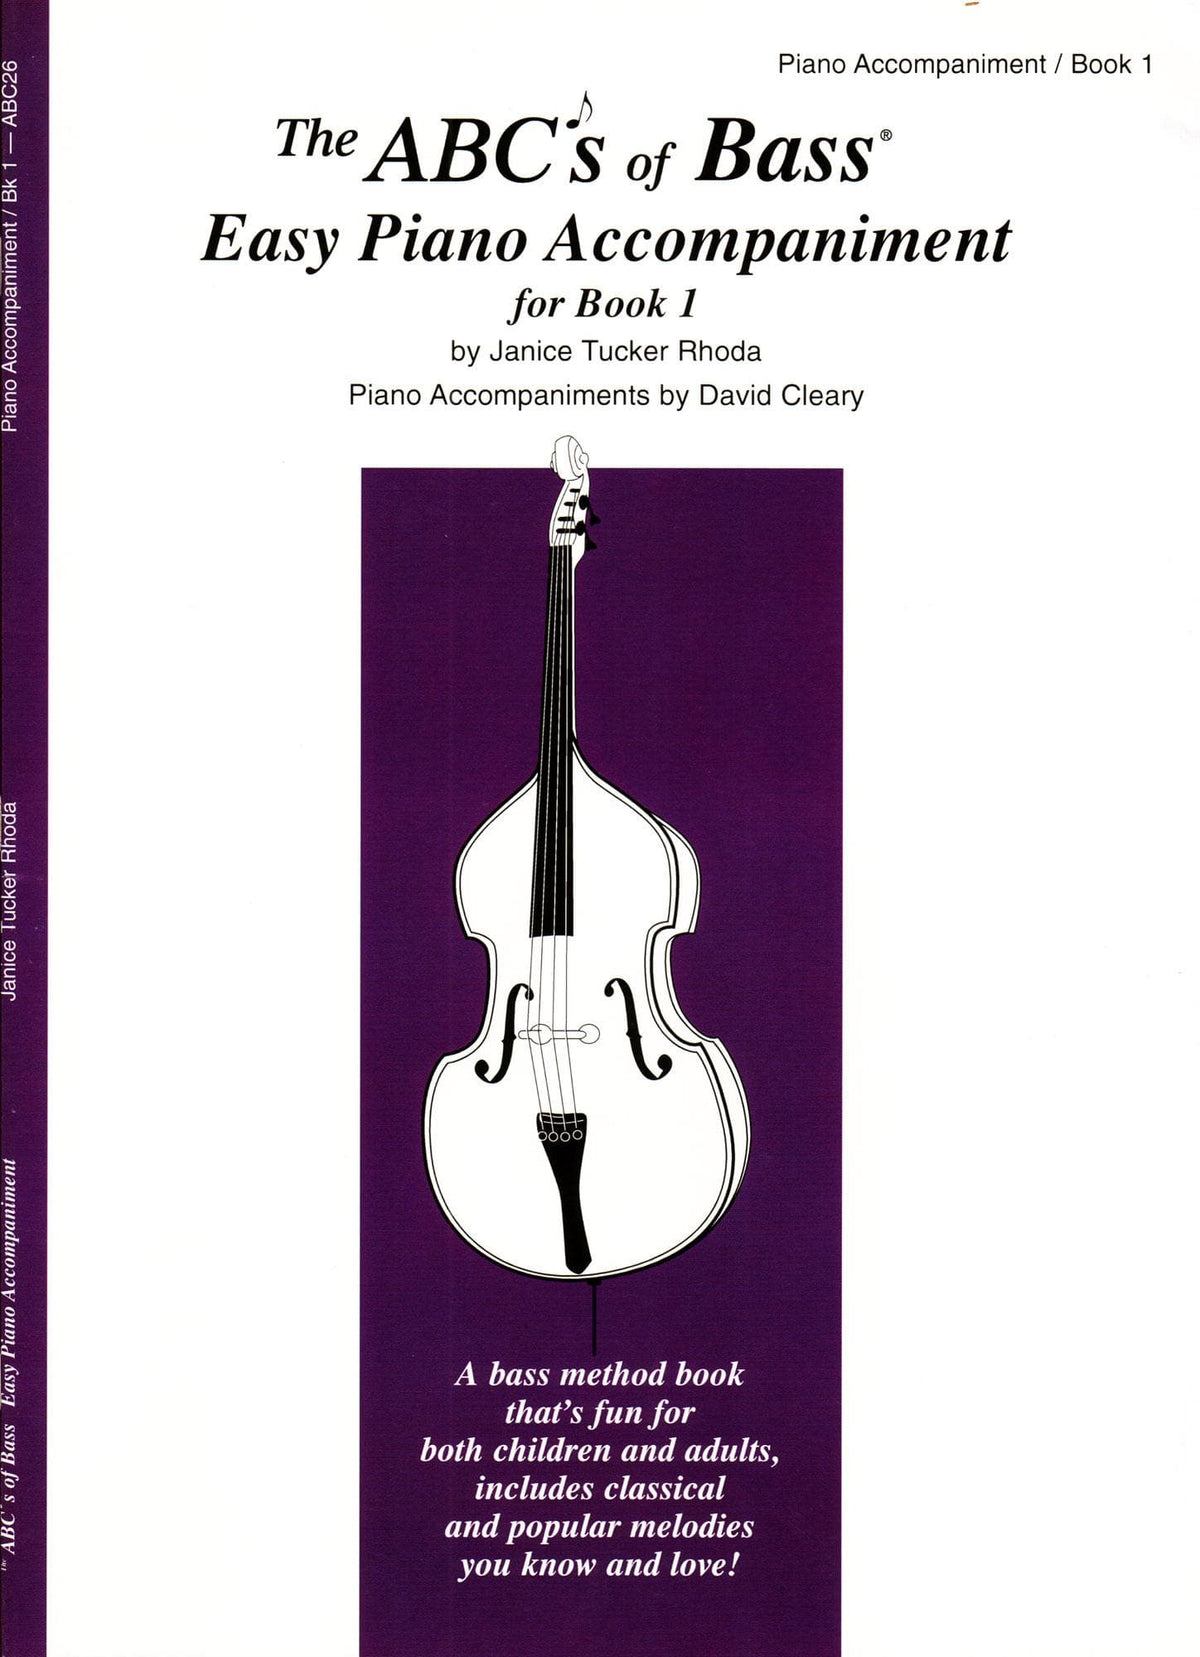 Rhoda, Janice Tucker - ABCs of Bass - Easy Piano Accompaniment Published by Carl Fischer